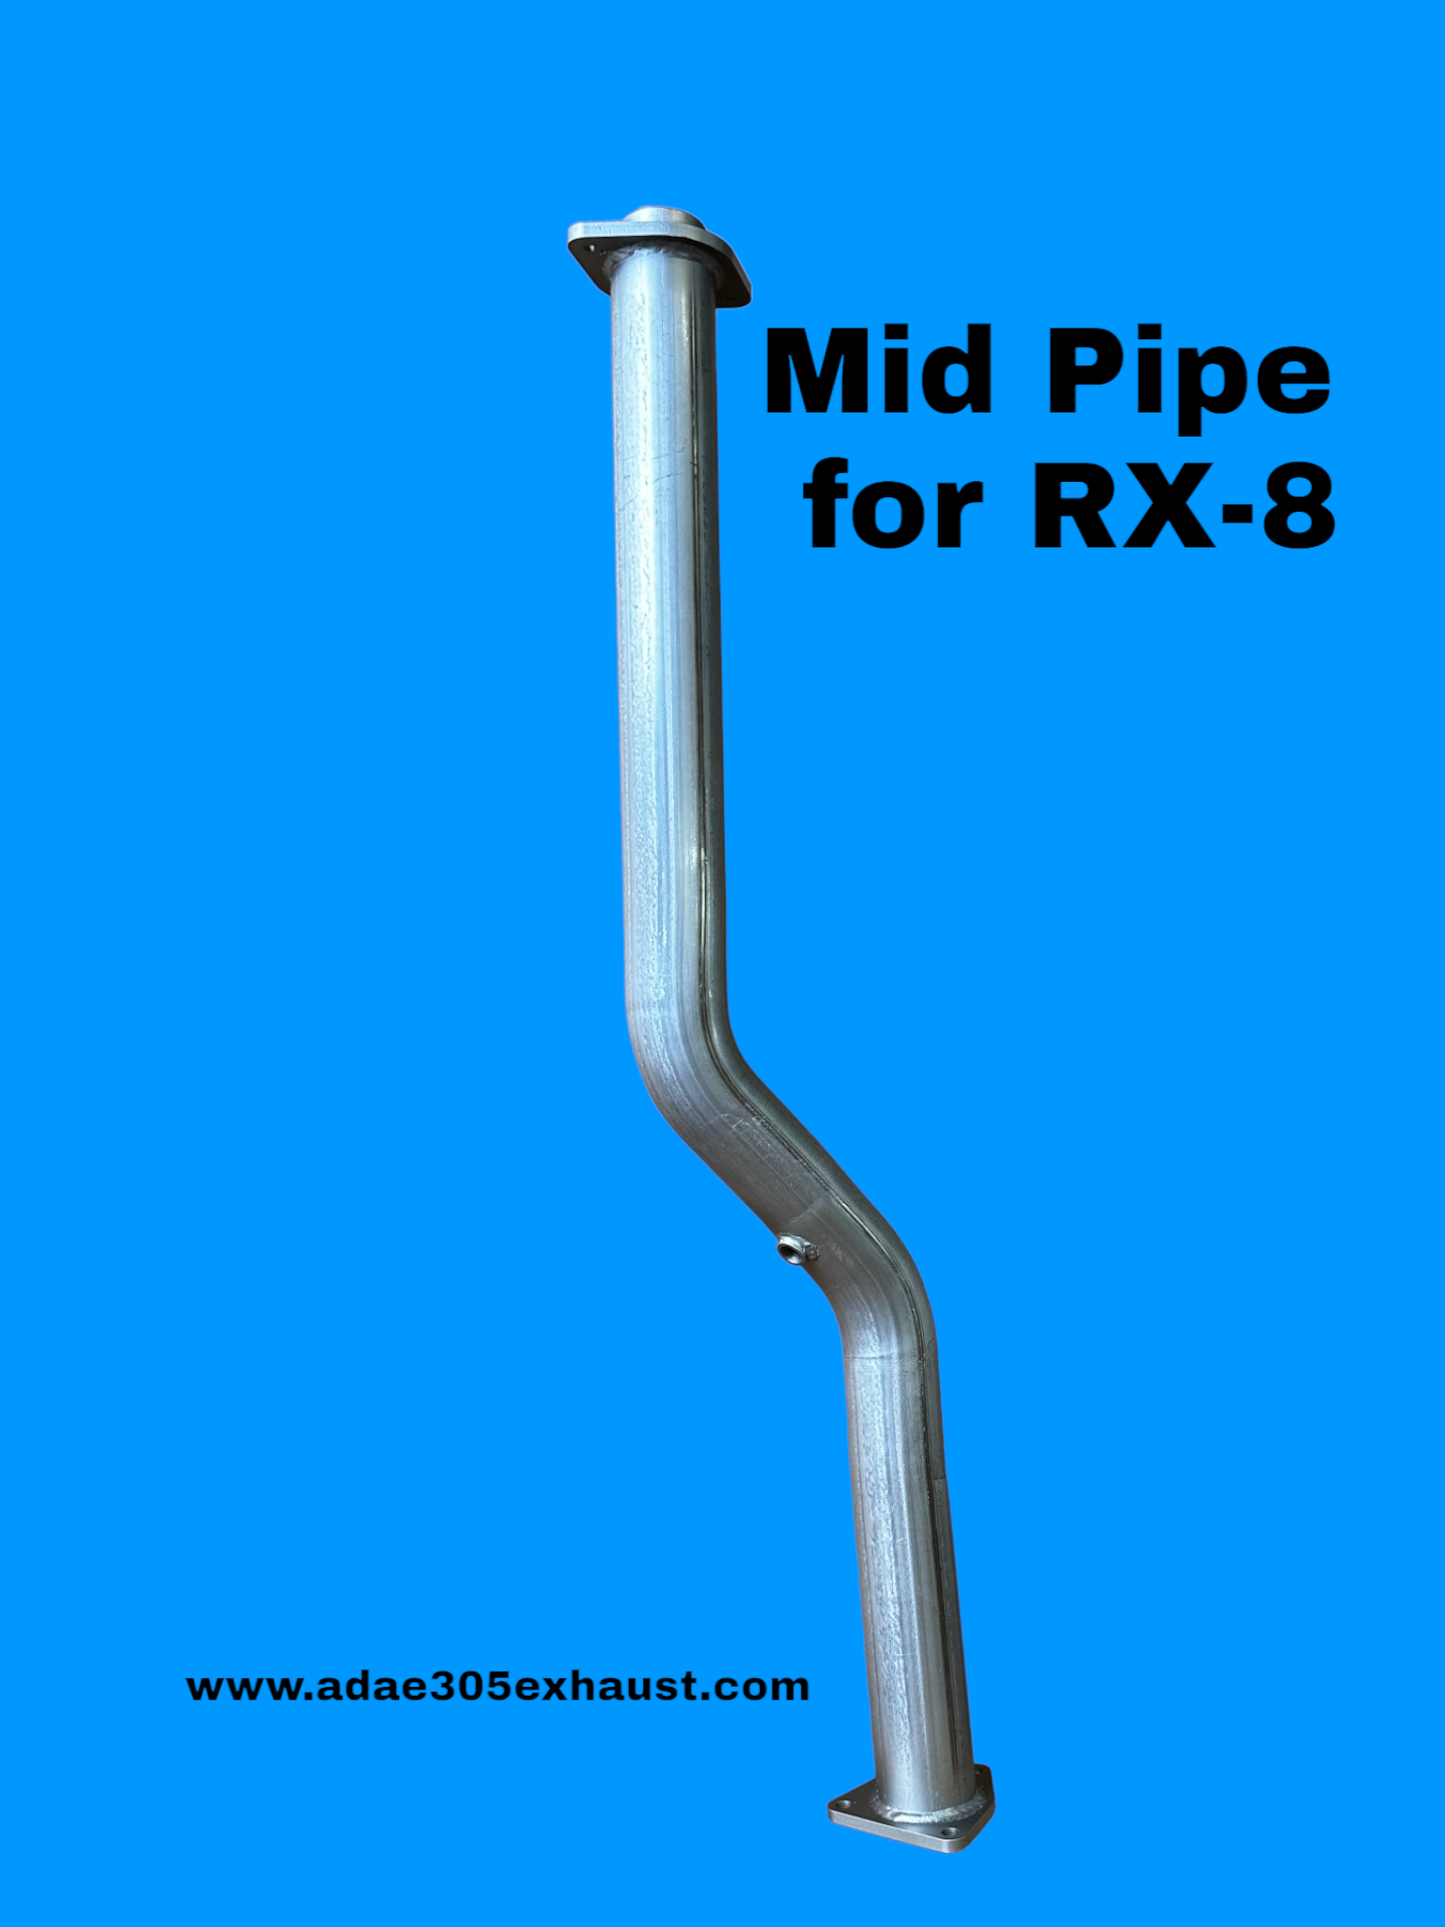 Mid pipe for RX-8